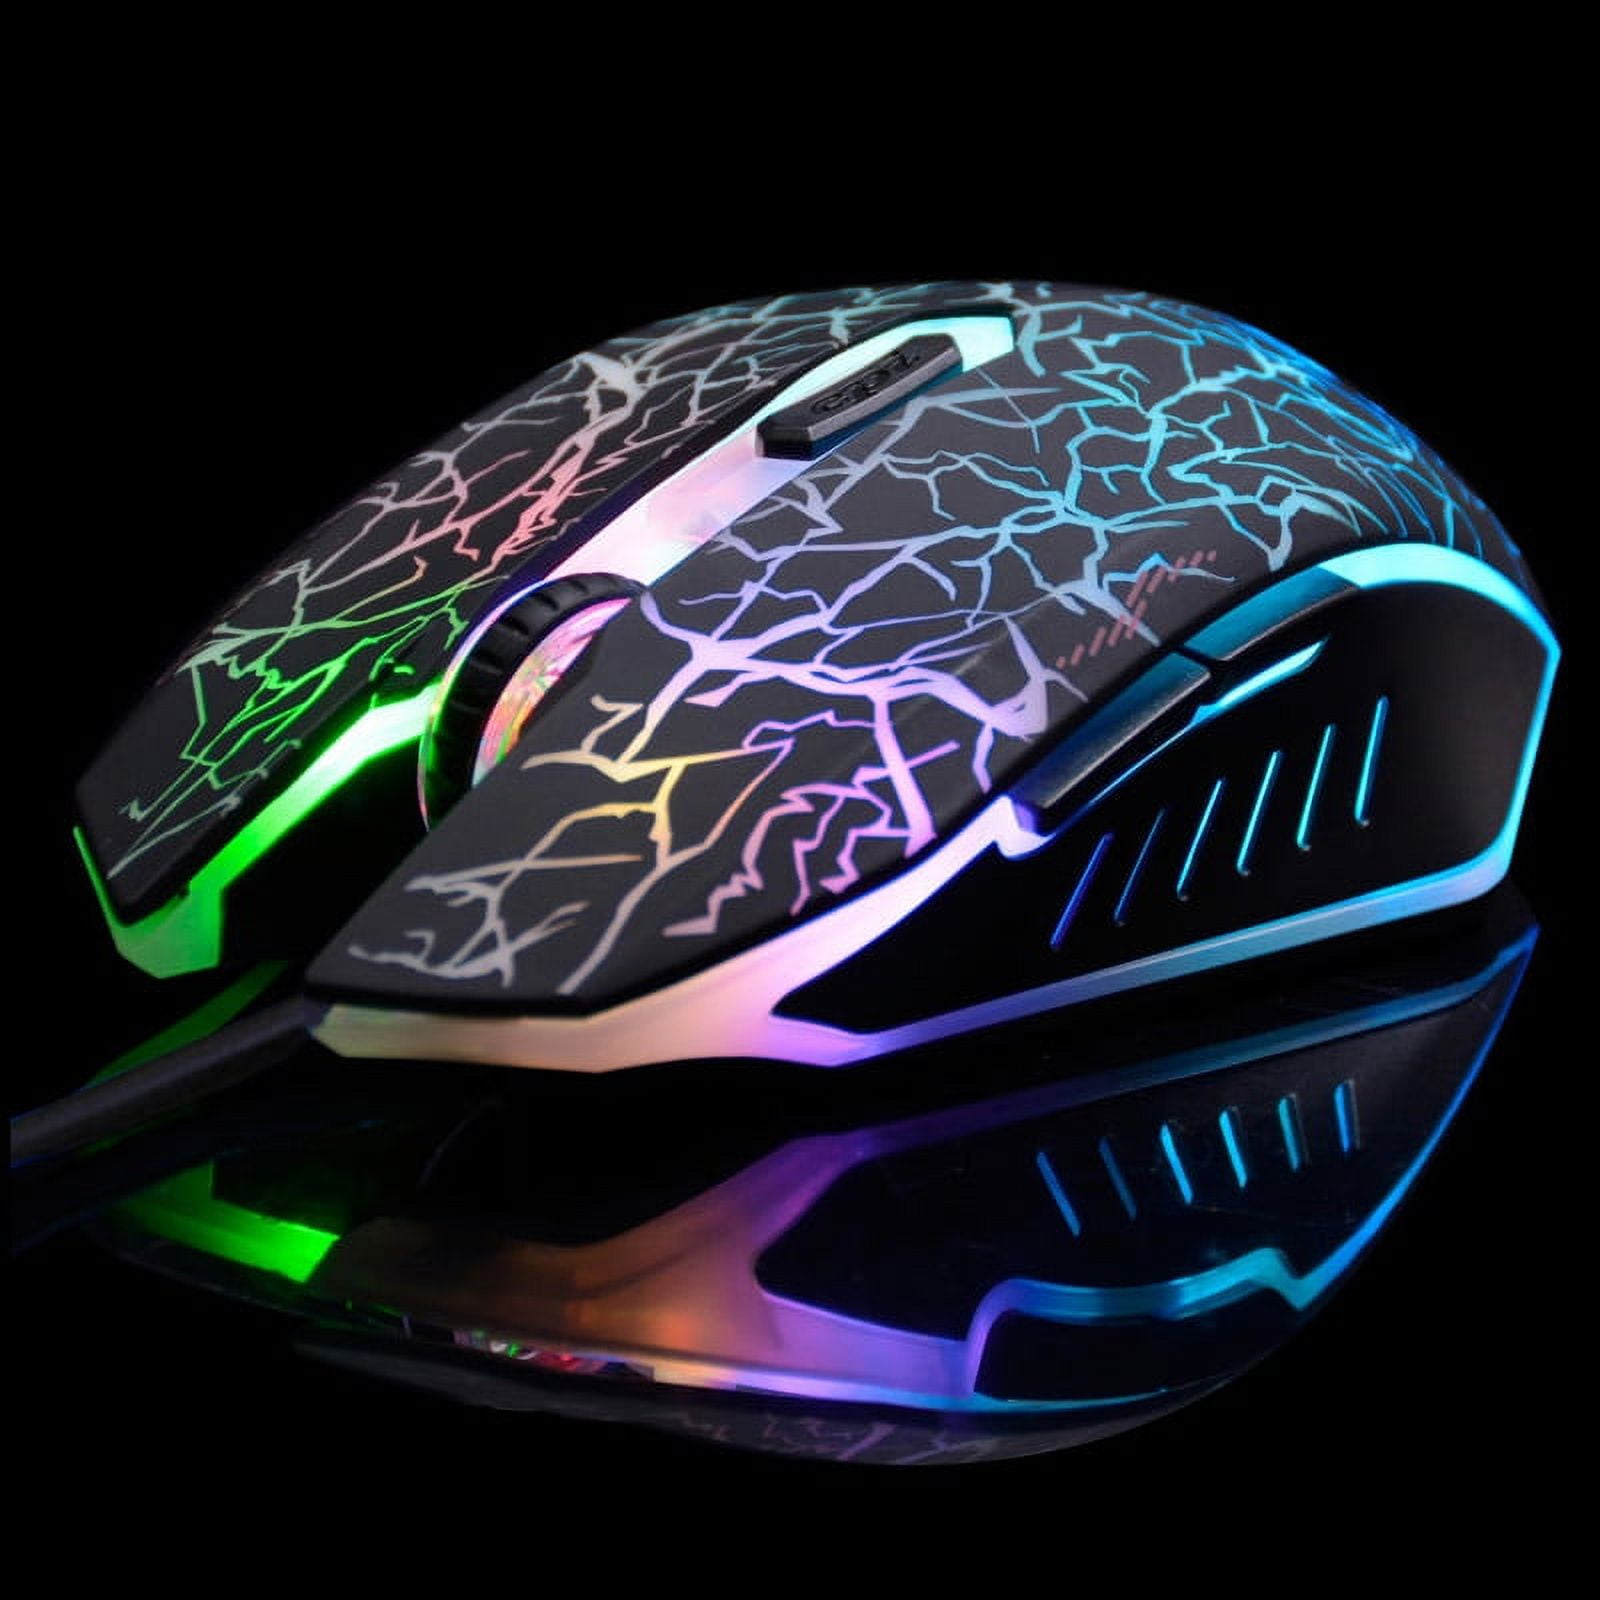 Want to buy Gaming Mouse RGB LED? Check it out on Silvergear now